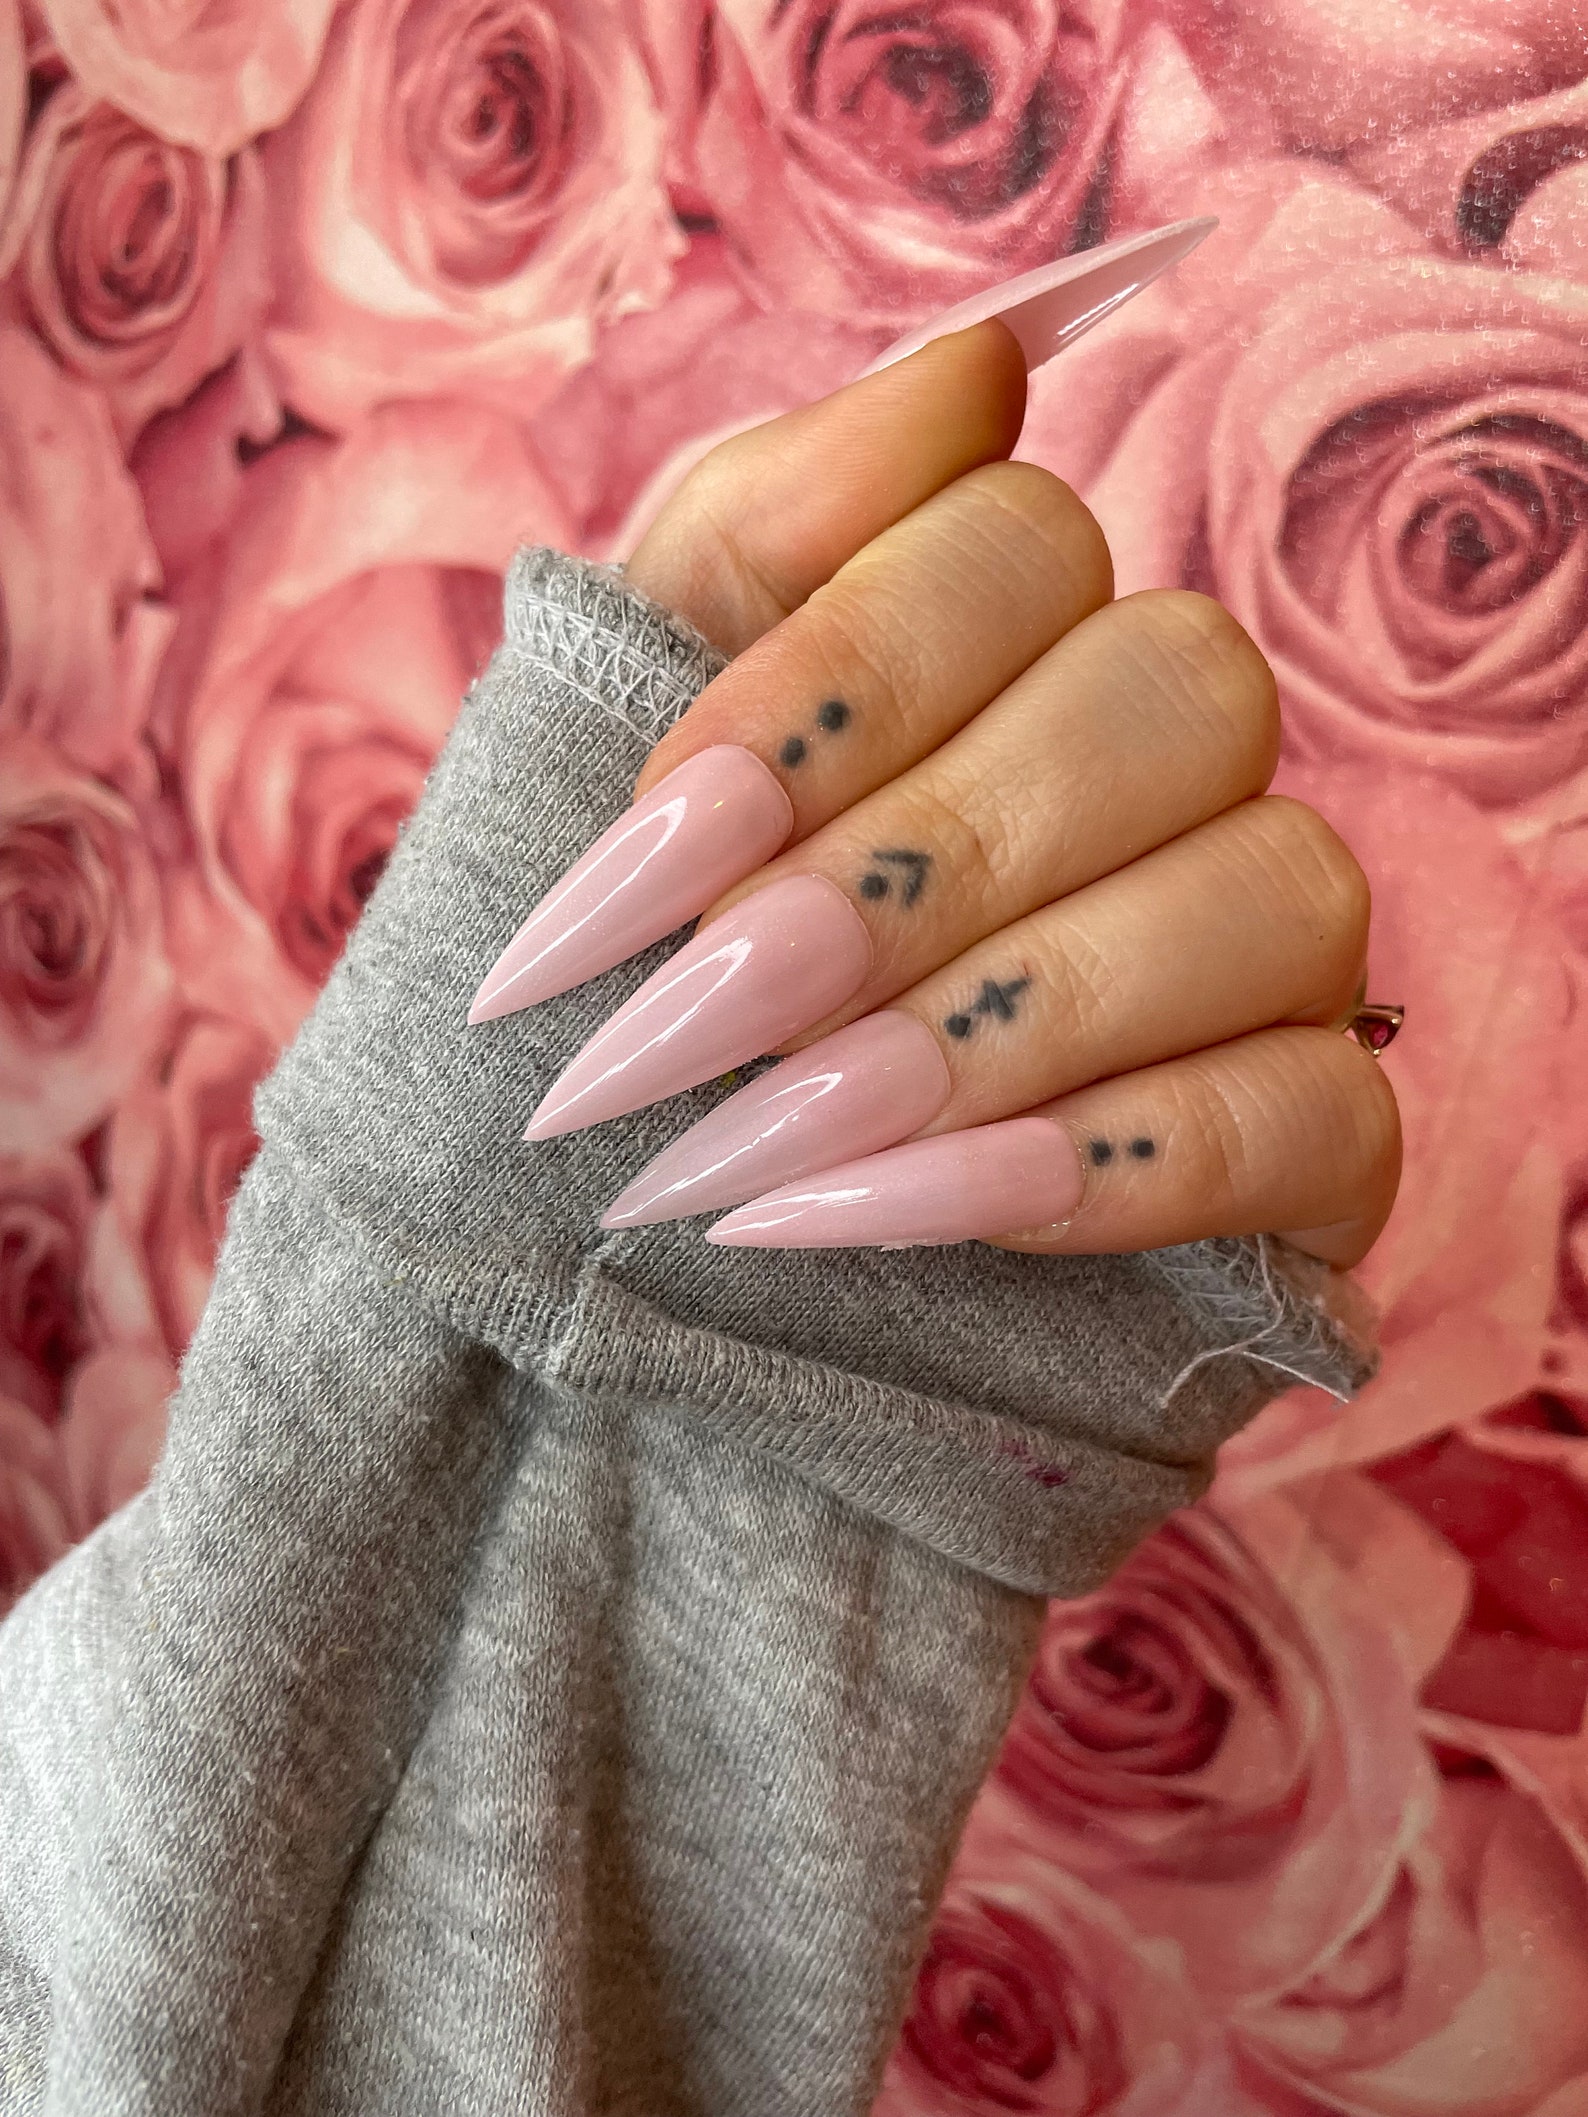 What's more attractive on a girl short nails or long nails? - GirlsAskGuys